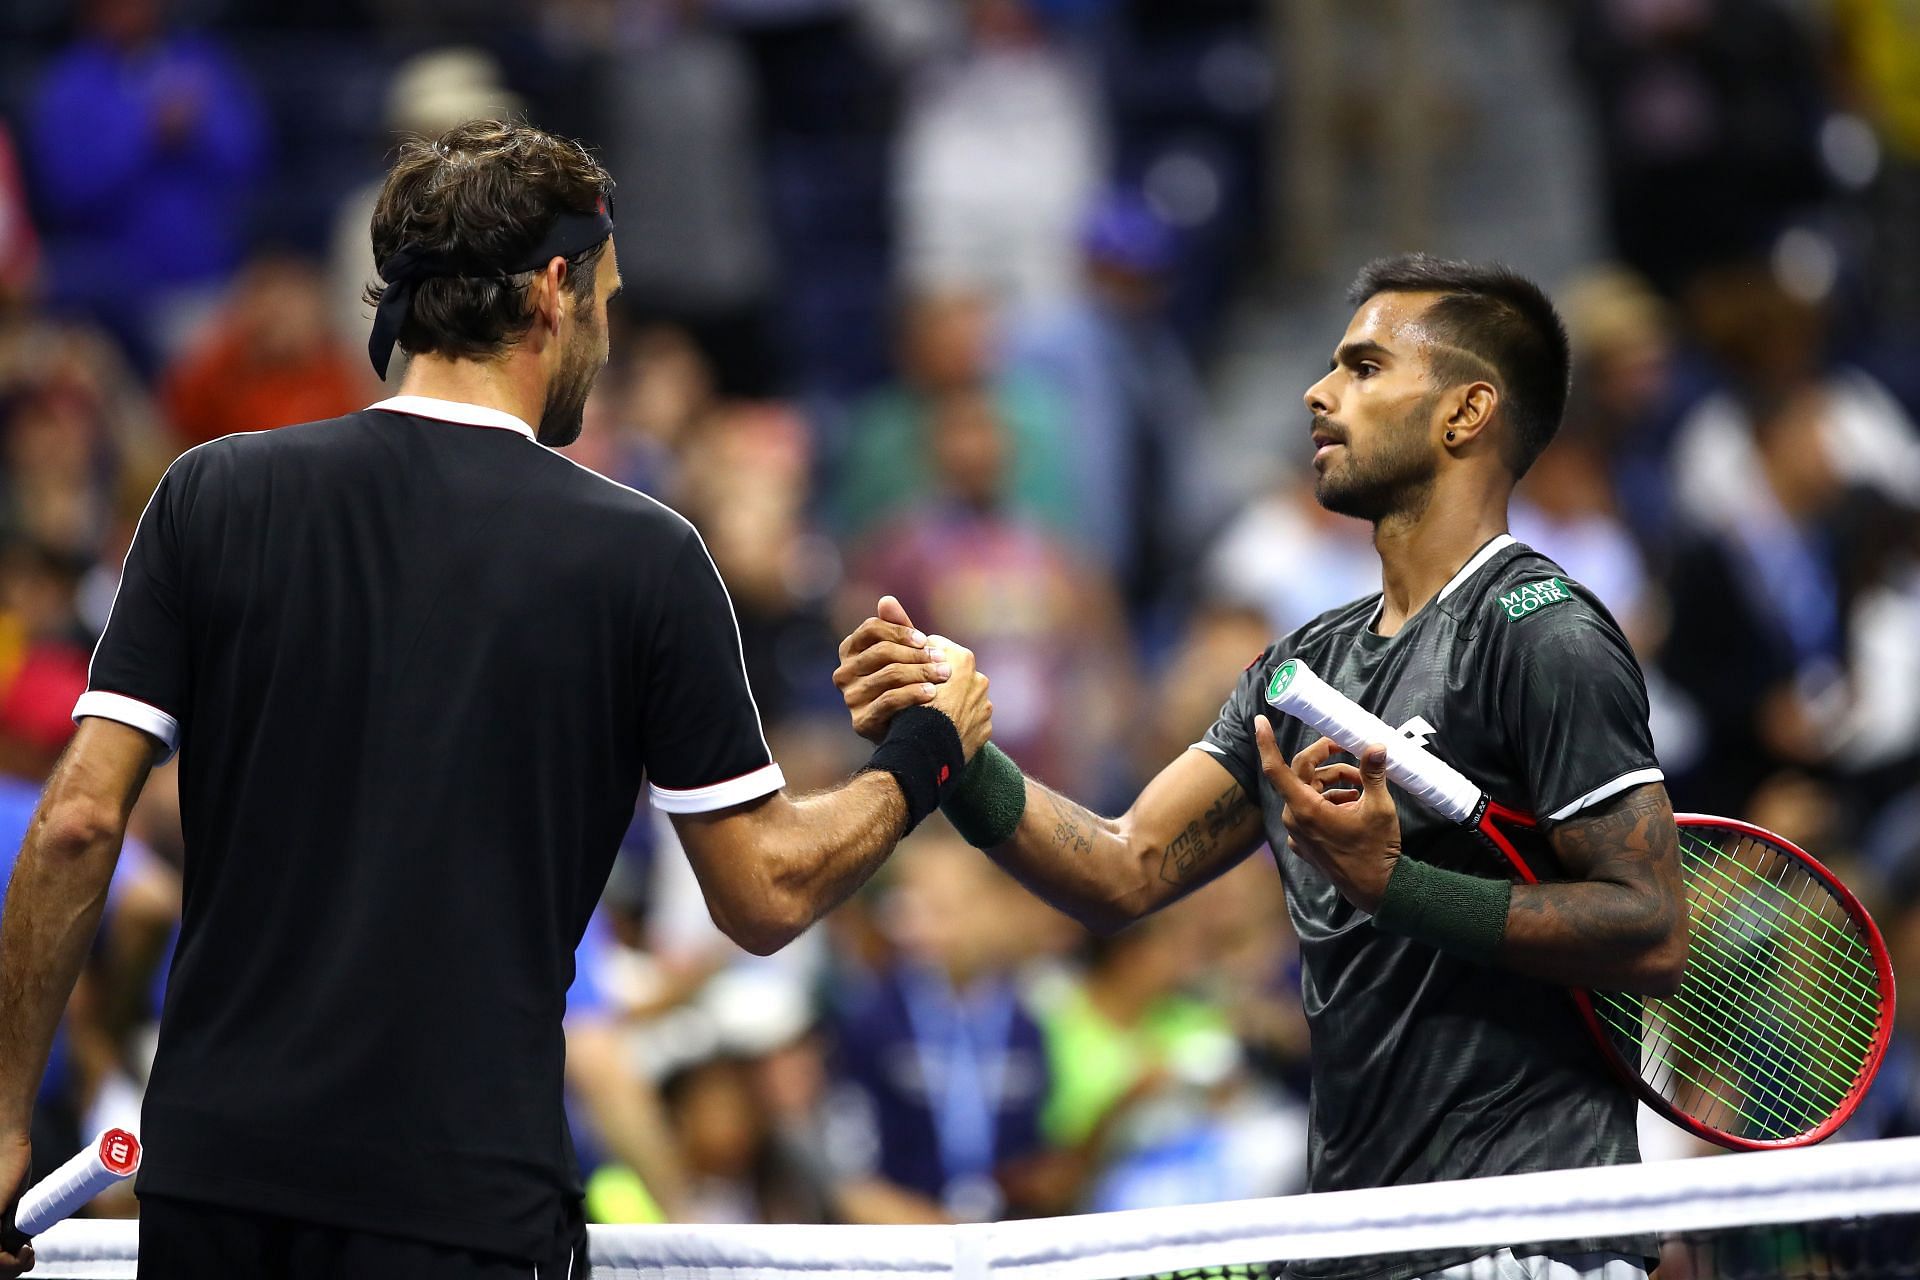 Sumit Nagal greets Roger Federer after their 2019 US Open match. 